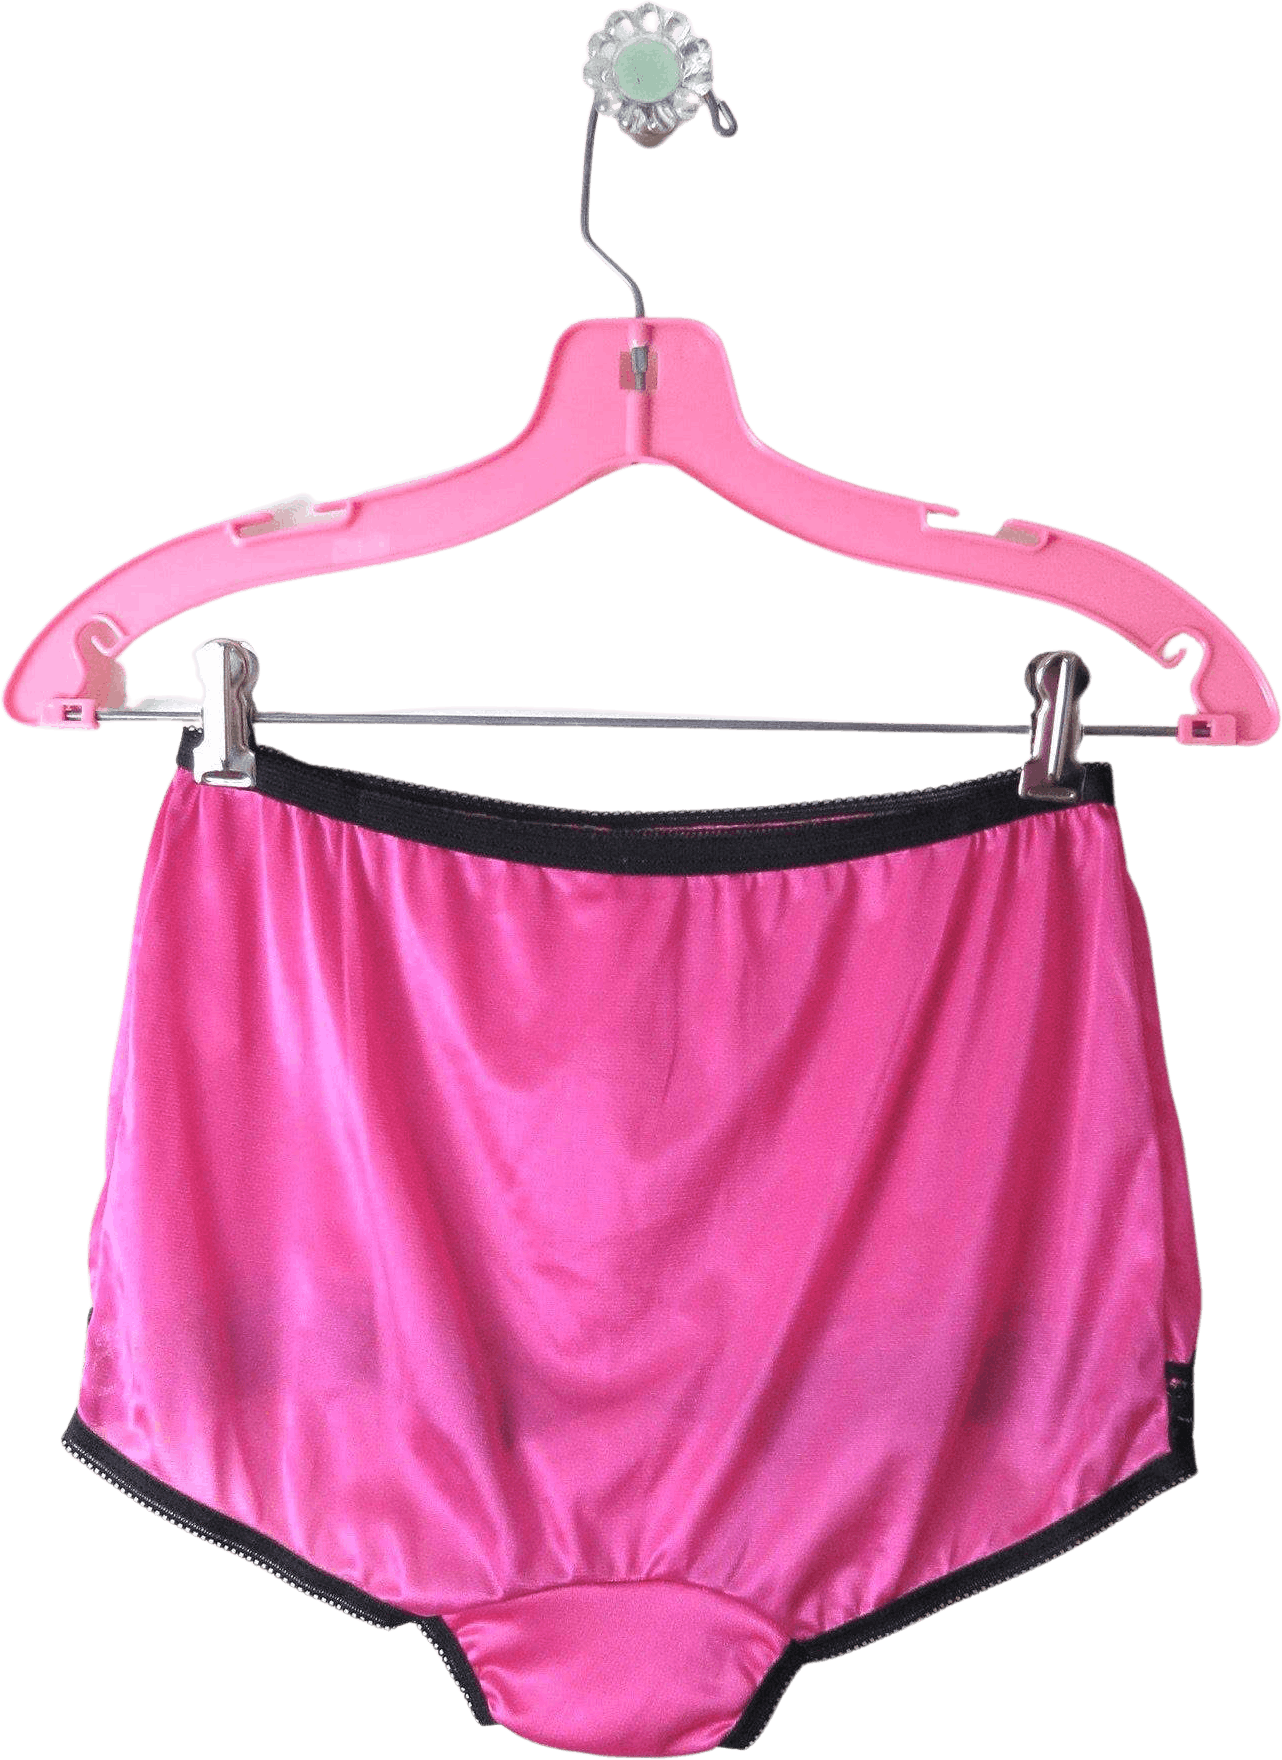 Vintage 50 S 60 S Pink Nylon Panties By Sweet Innocent Nylon Panty Shop Thrilling